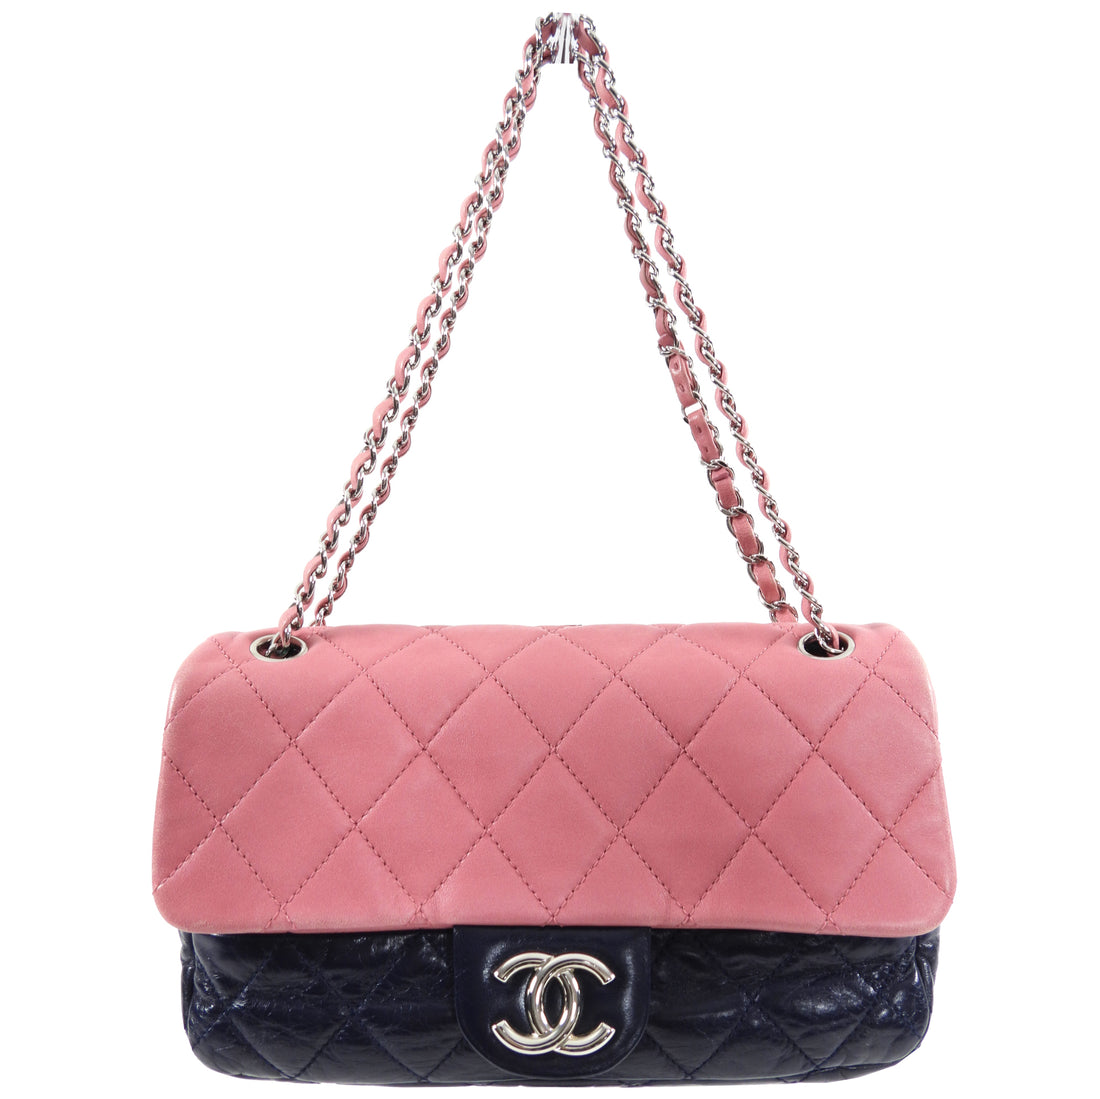 Chanel Pink and Navy Bicolor Quilted Leather Flap Bag